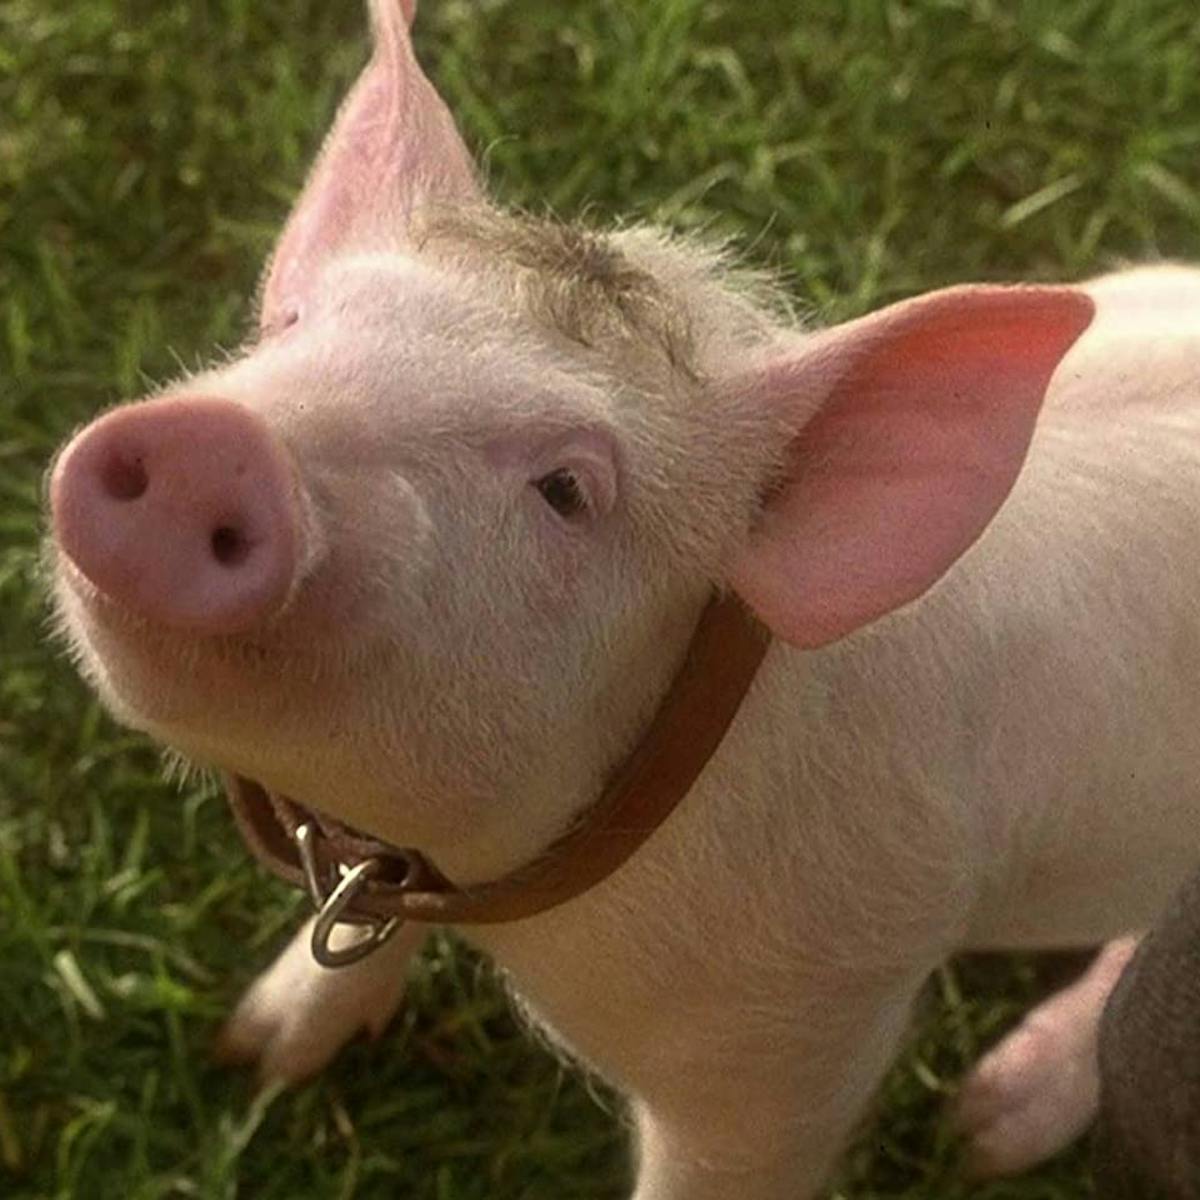 ID: Babe the pig stands in grass with a brown collar on looking toward the camera.